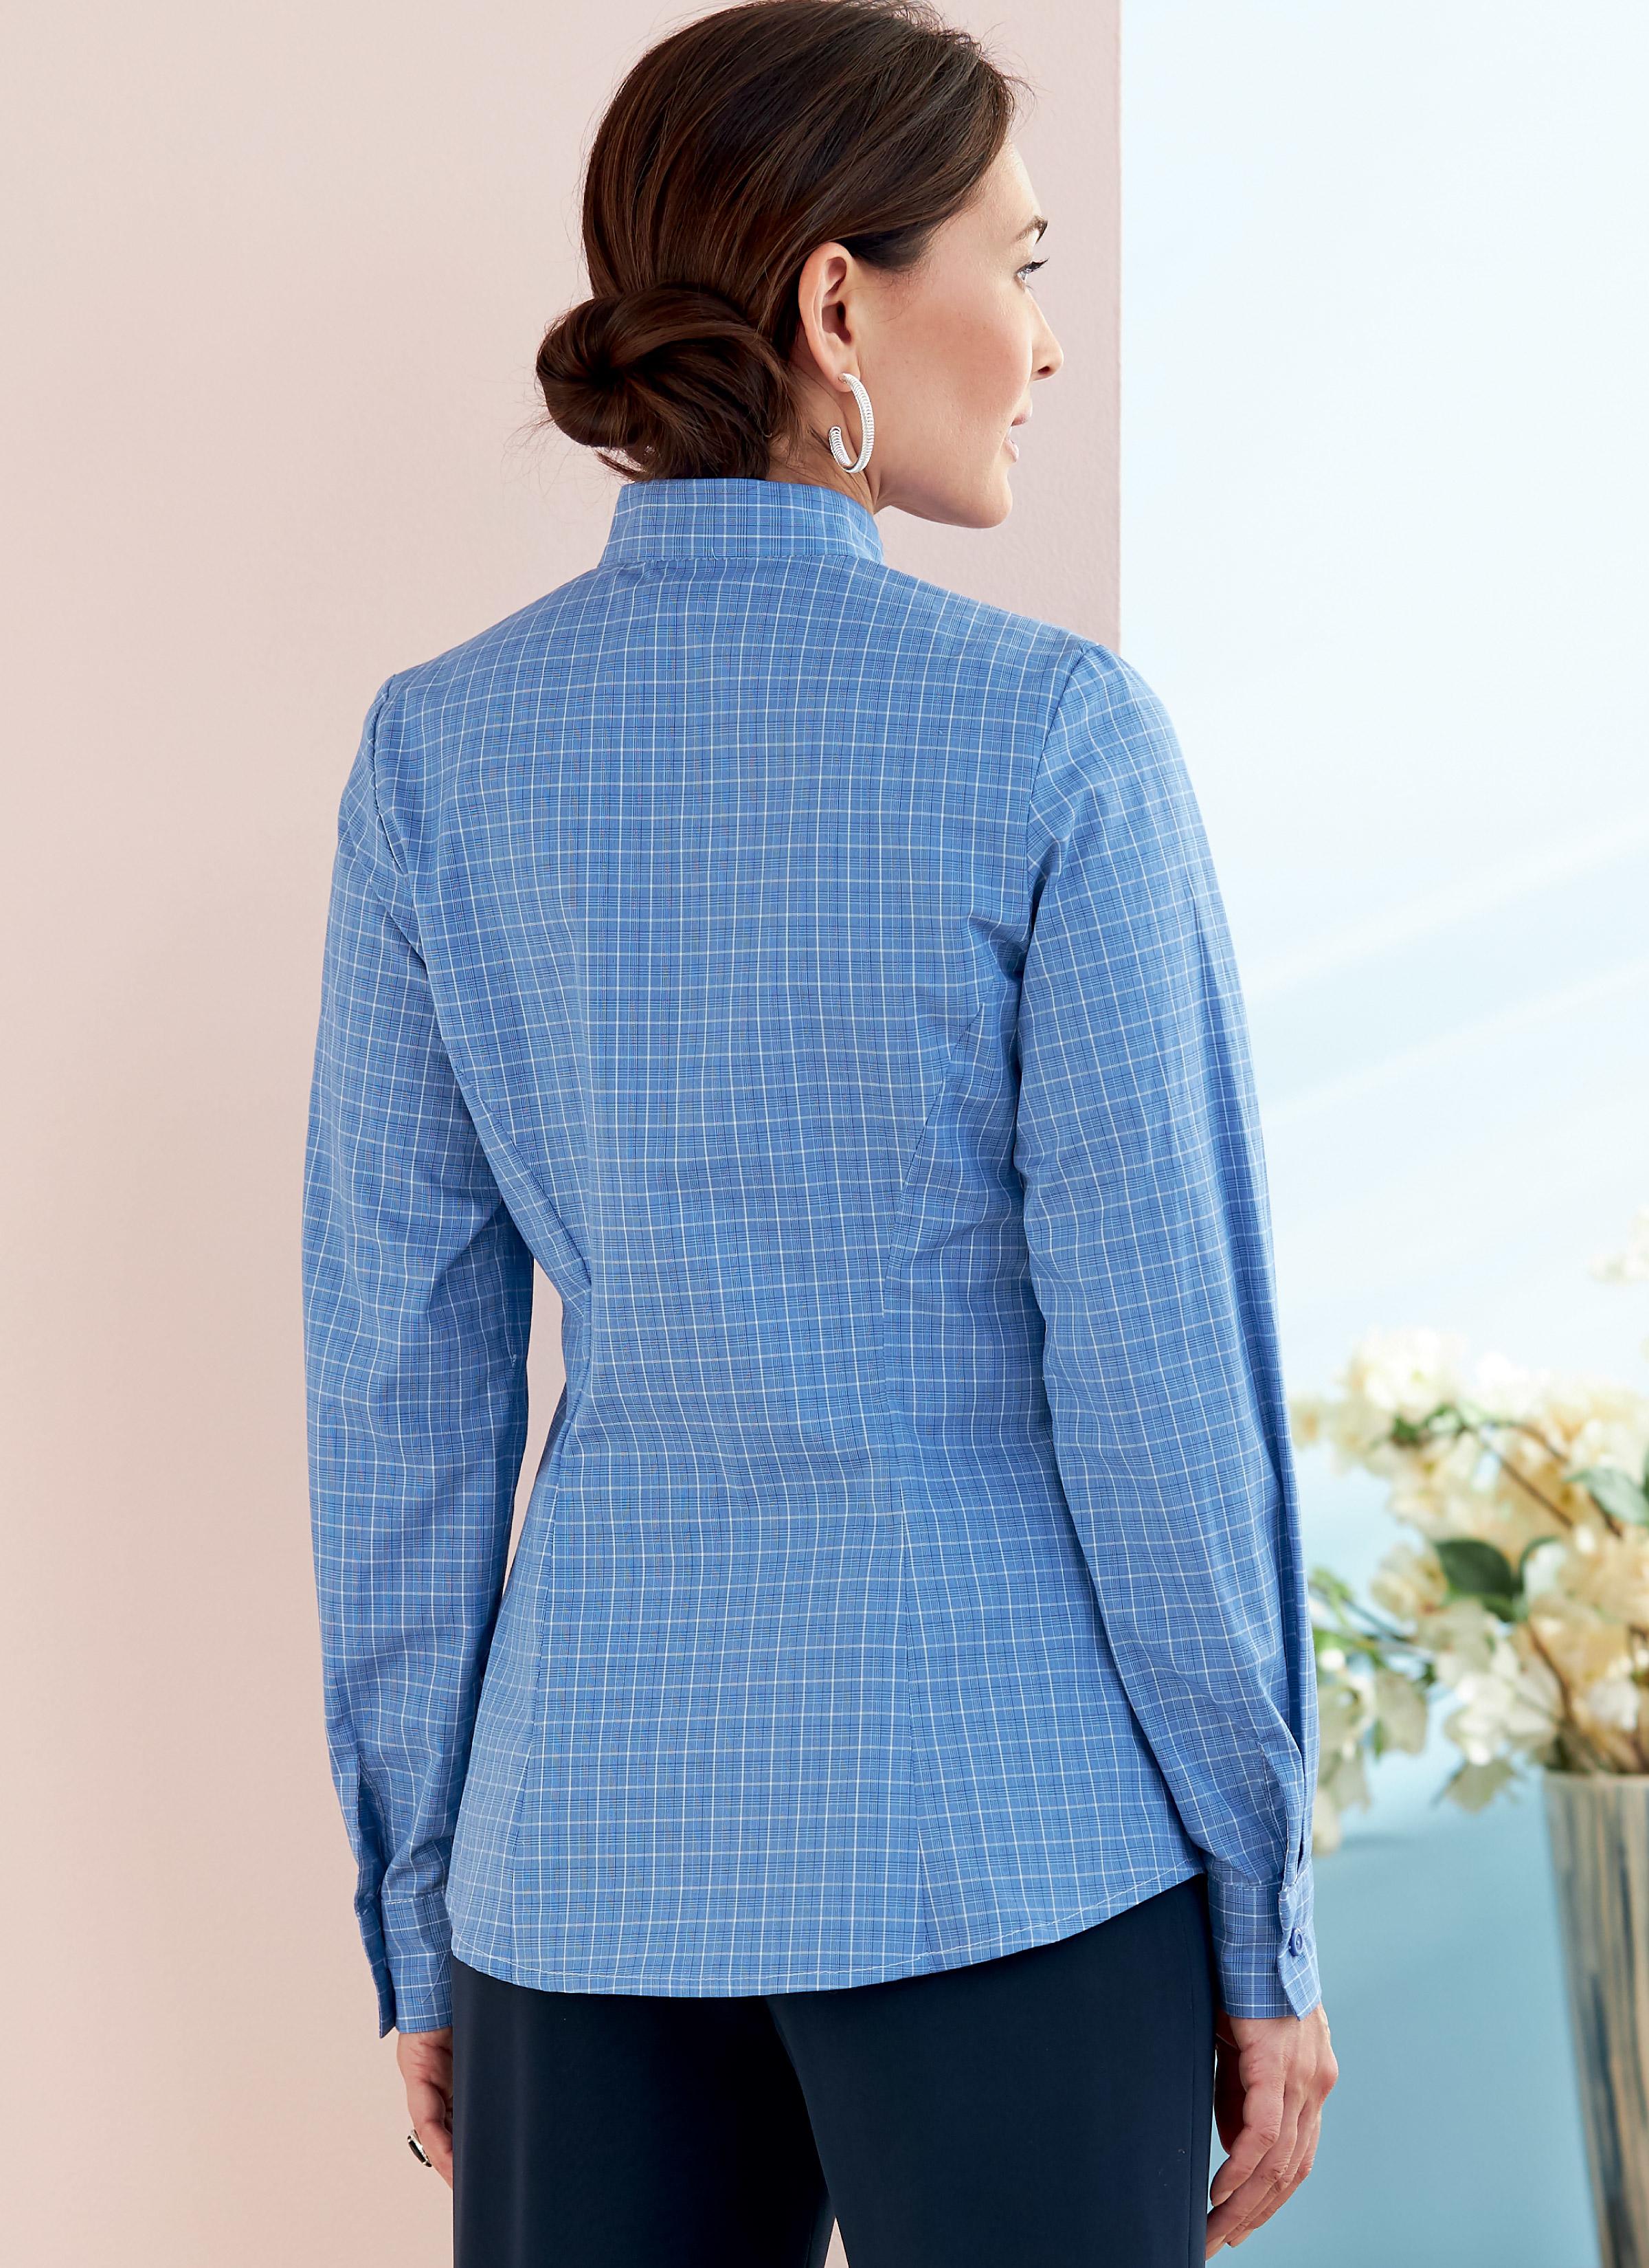 Butterick B6747 Misses' Button-Down Collared Shirts